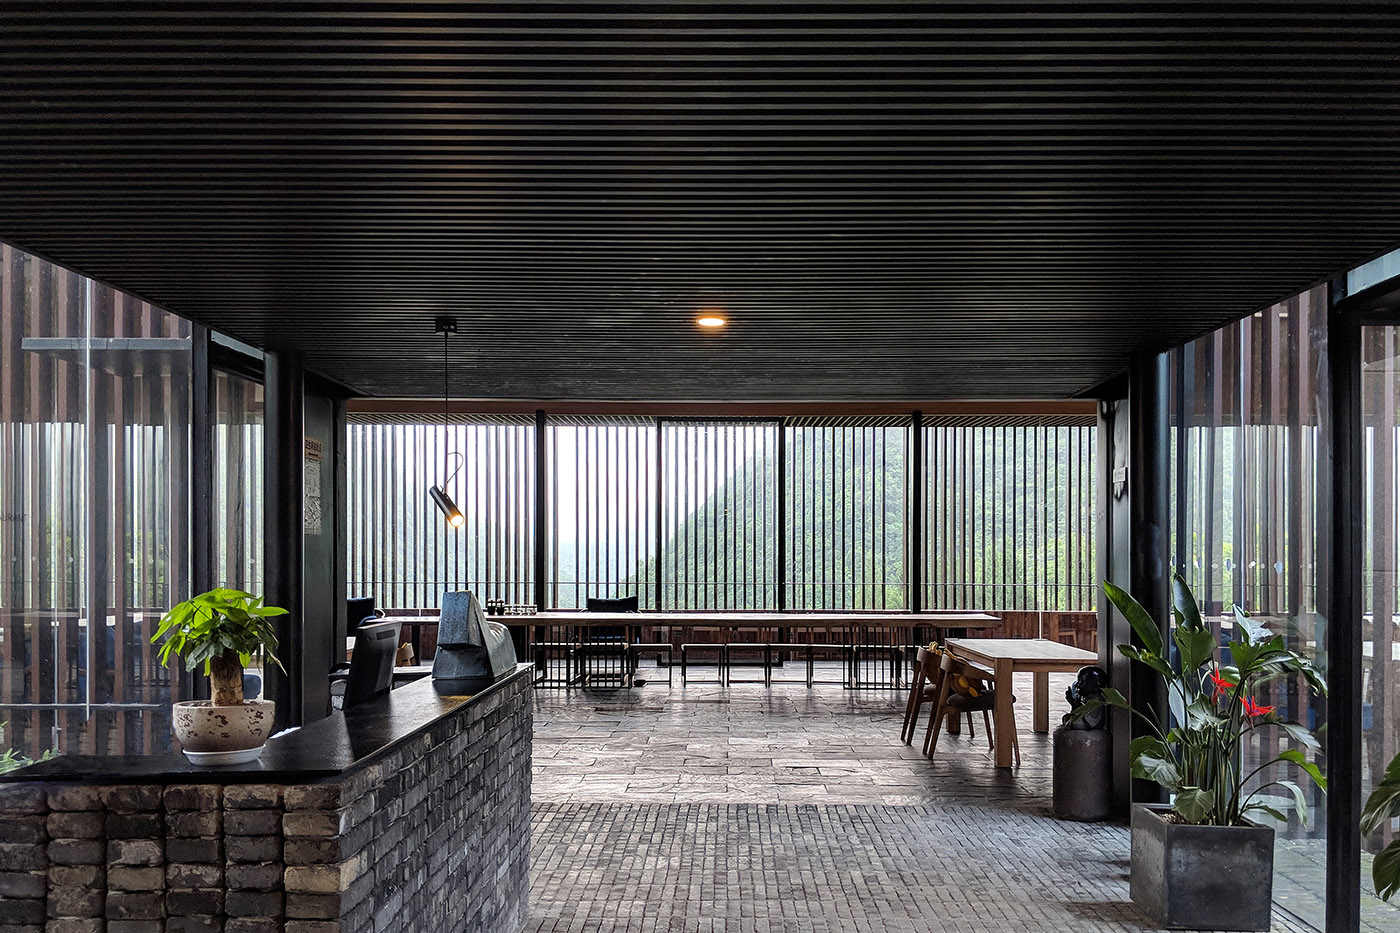 Mountain Restaurant & Bar: volumes, spaces and settings following the slope of a hill